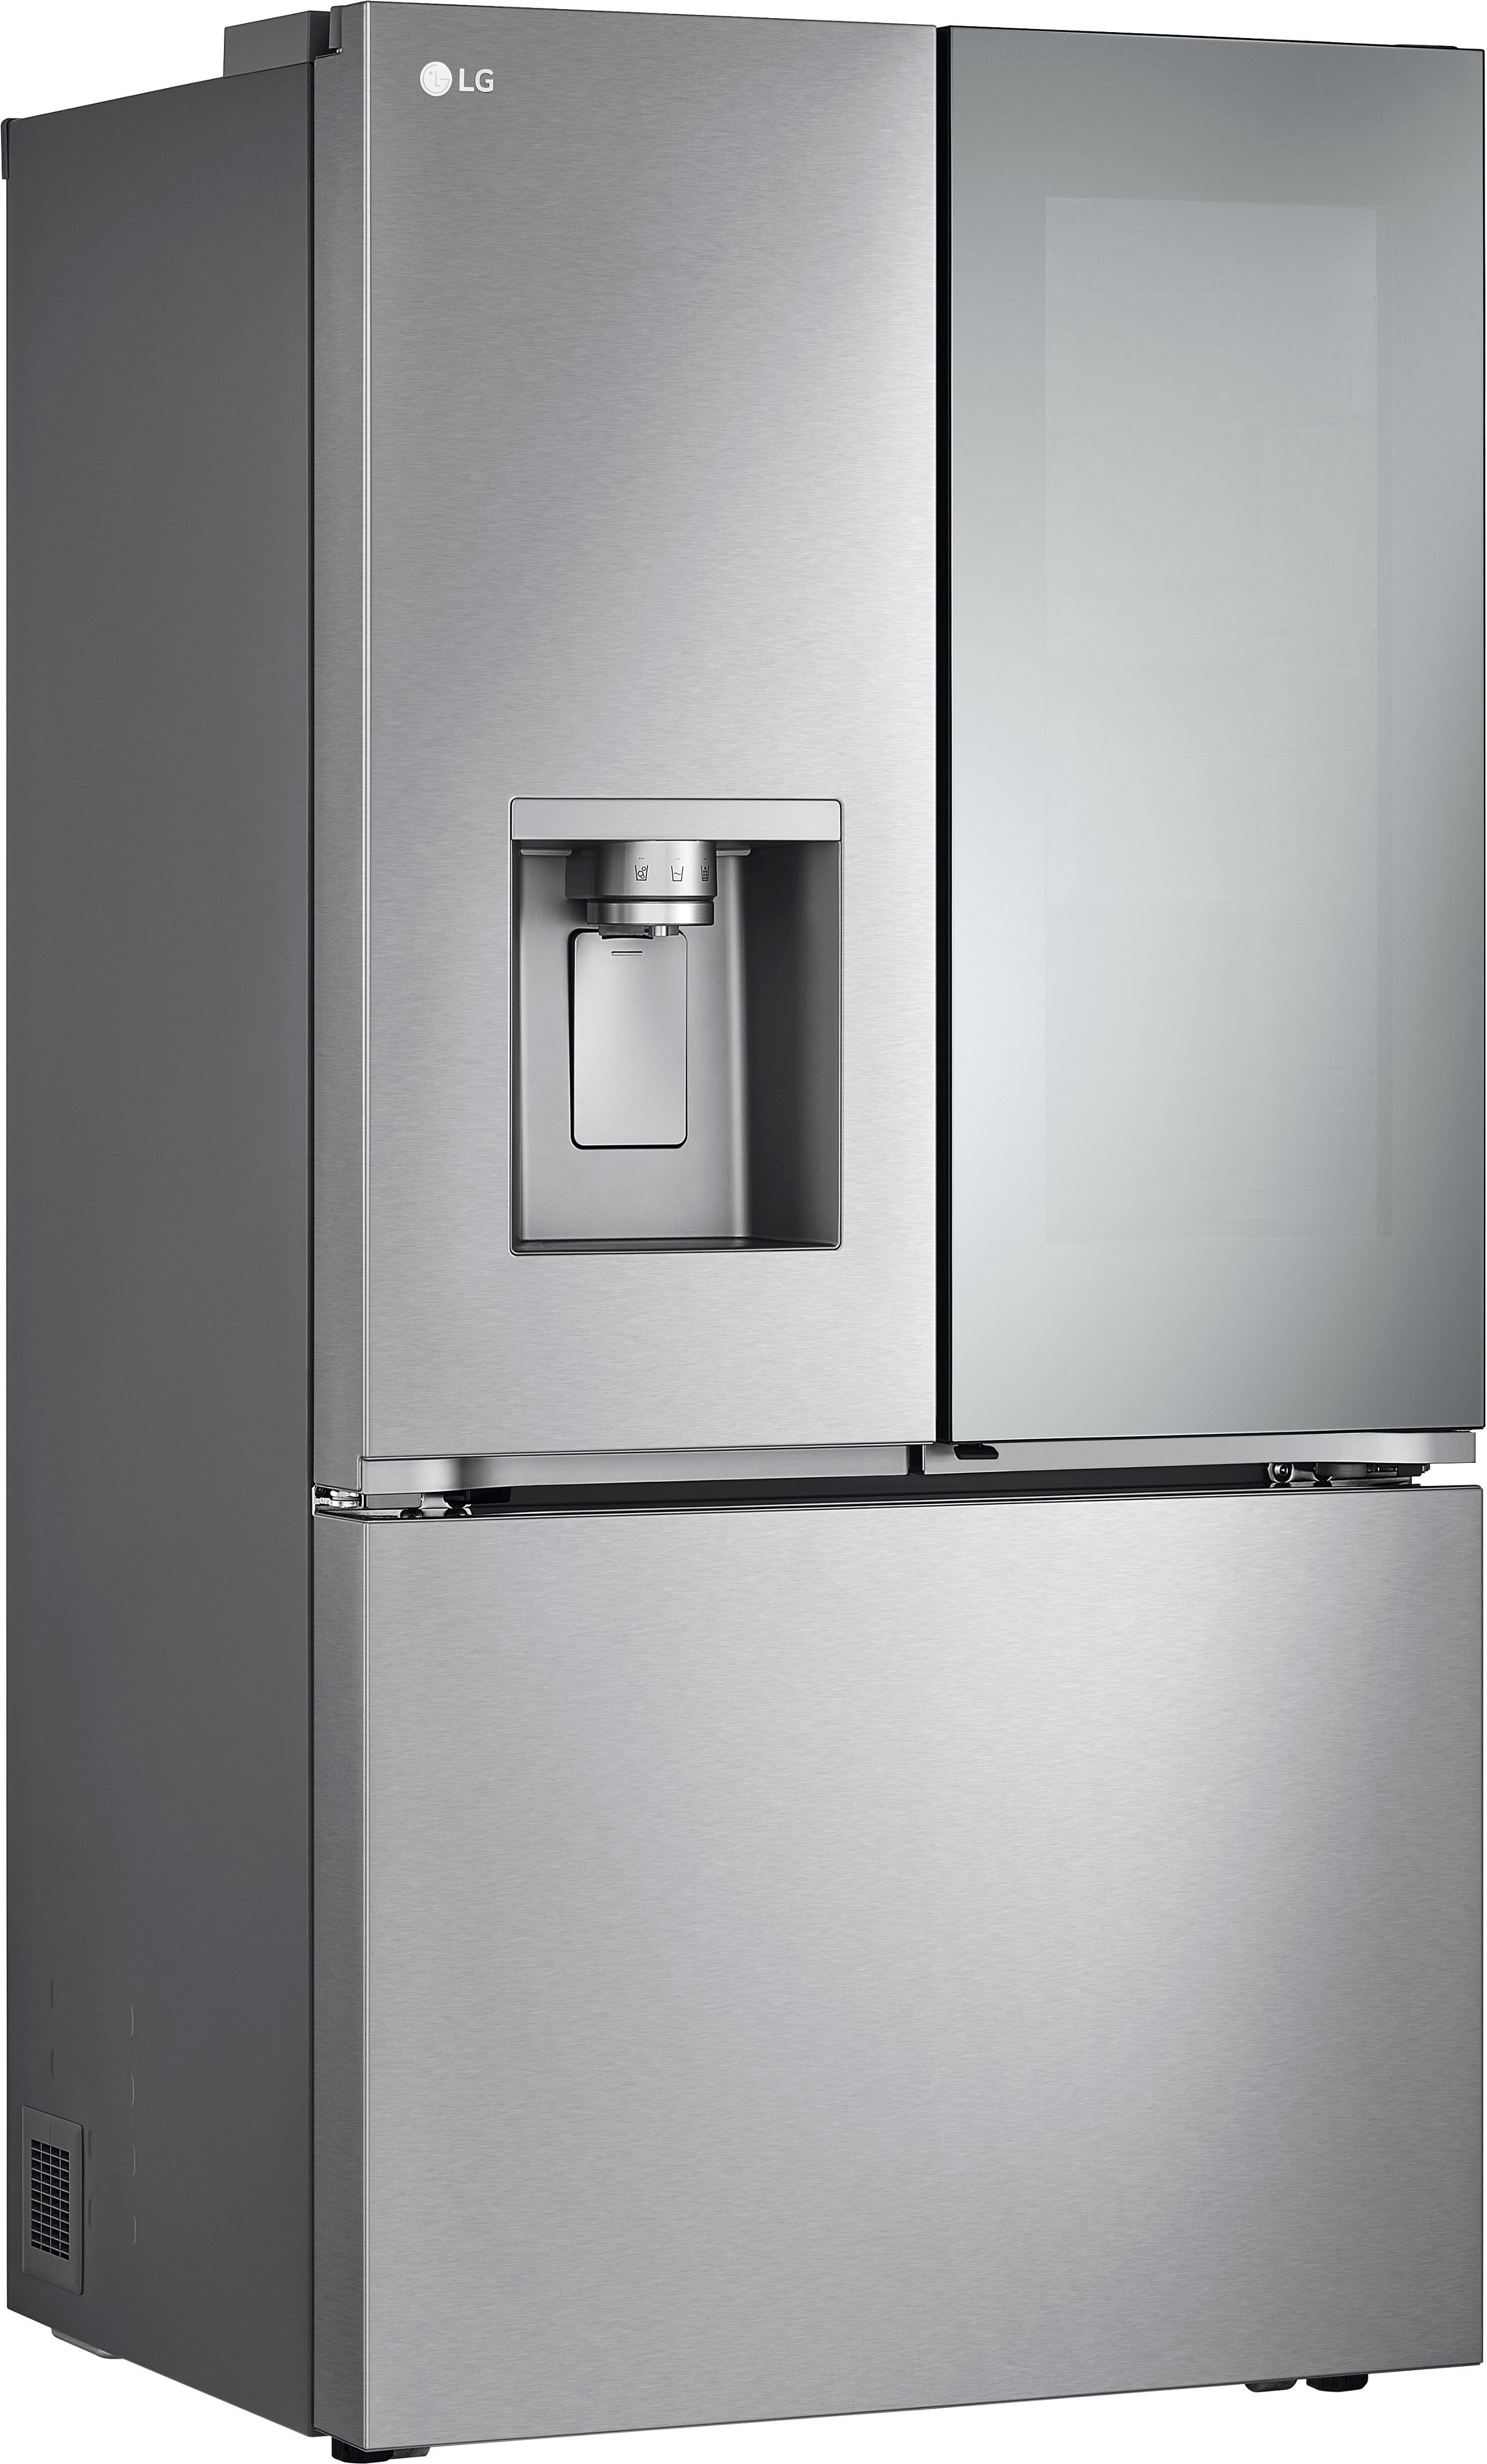 Angle View: LG - 30.7 Cu. Ft. French Door Smart Refrigerator with InstaView - Stainless Steel